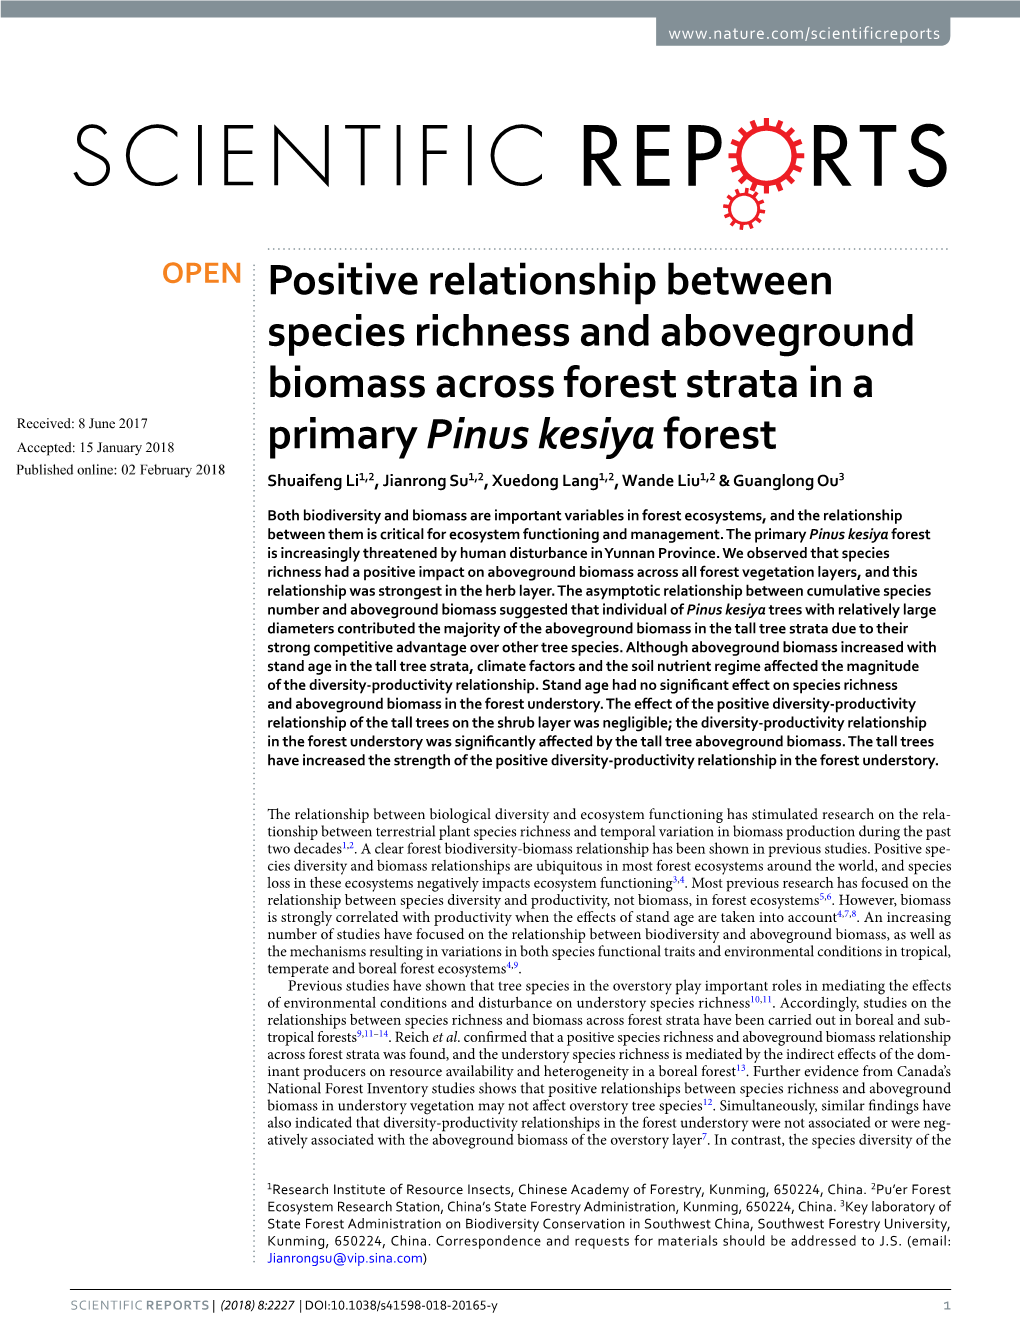 Positive Relationship Between Species Richness and Aboveground Biomass Across Forest Strata in a Primary Pinus Kesiya Forest